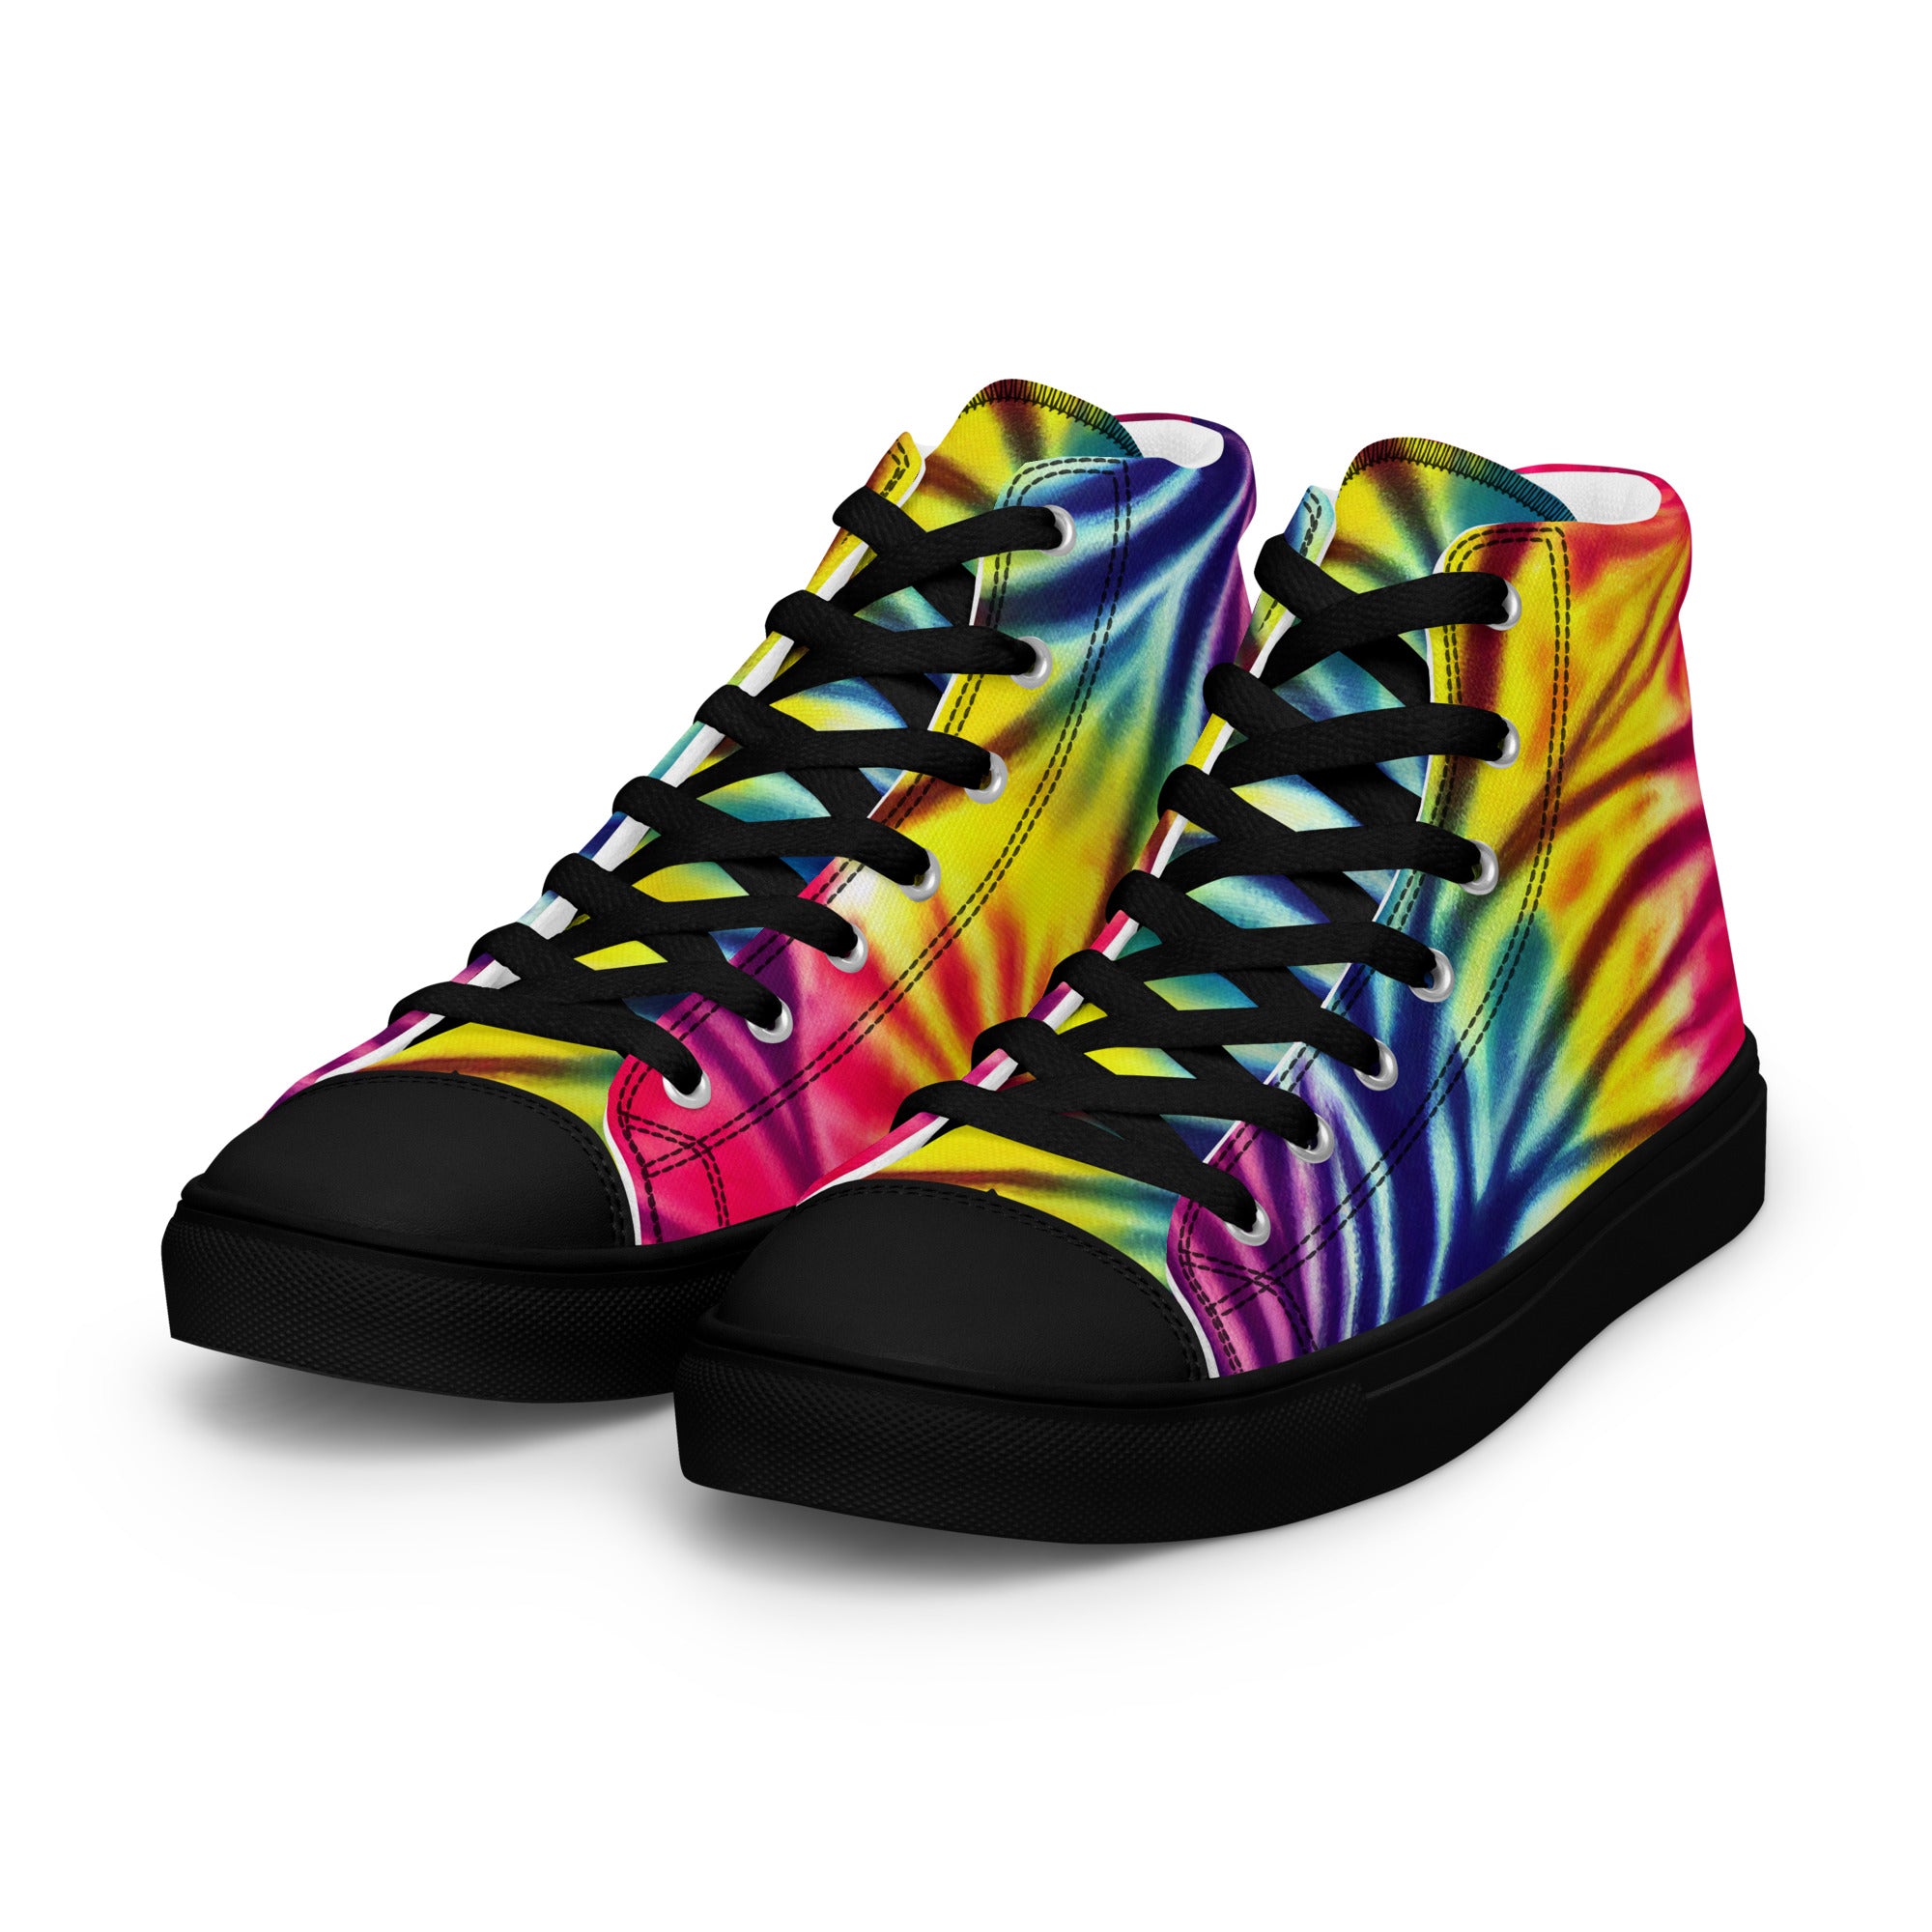 Women’s high top canvas shoes- Floral Tie Dye Pattern I